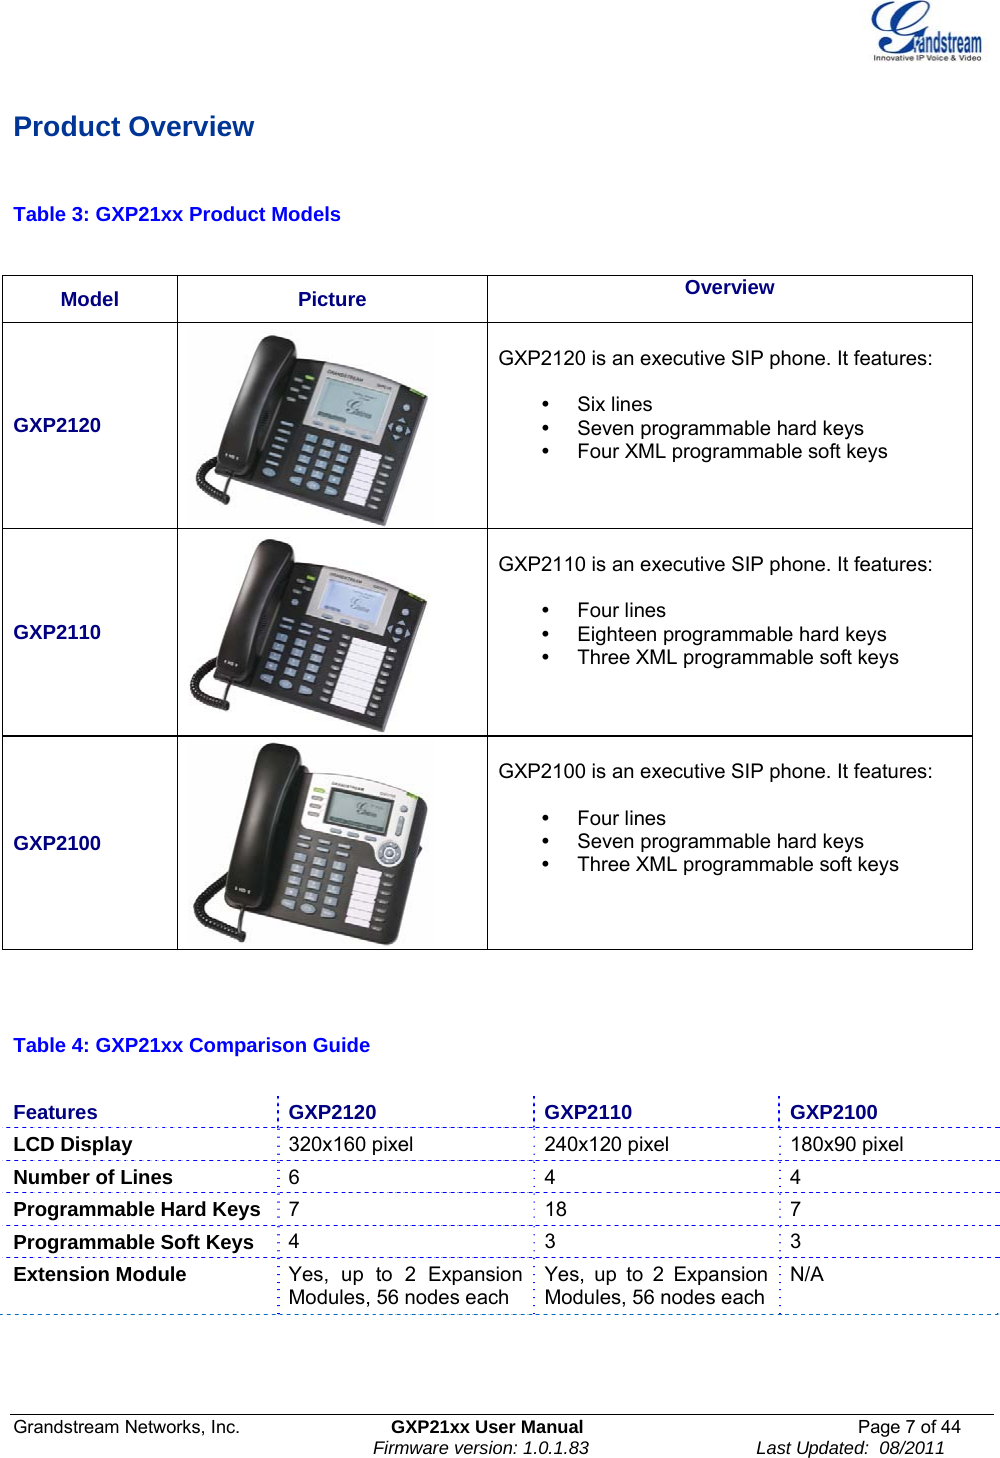  Grandstream Networks, Inc.  GXP21xx User Manual  Page 7 of 44                                                                Firmware version: 1.0.1.83                                 Last Updated:  08/2011  Product Overview  Table 3: GXP21xx Product Models   Model Picture  Overview  GXP2120   GXP2120 is an executive SIP phone. It features:  y Six lines y  Seven programmable hard keys  y  Four XML programmable soft keys  GXP2110   GXP2110 is an executive SIP phone. It features:  y Four lines y  Eighteen programmable hard keys  y  Three XML programmable soft keys GXP2100   GXP2100 is an executive SIP phone. It features:  y Four lines y  Seven programmable hard keys  y  Three XML programmable soft keys   Table 4: GXP21xx Comparison Guide  Features GXP2120 GXP2110 GXP2100 LCD Display  320x160 pixel 240x120 pixel  180x90 pixel  Number of Lines  6 4 4 Programmable Hard Keys 7 18 7 Programmable Soft Keys  4 3 3 Extension Module   Yes, up to 2 Expansion Modules, 56 nodes each Yes, up to 2 Expansion Modules, 56 nodes each N/A     